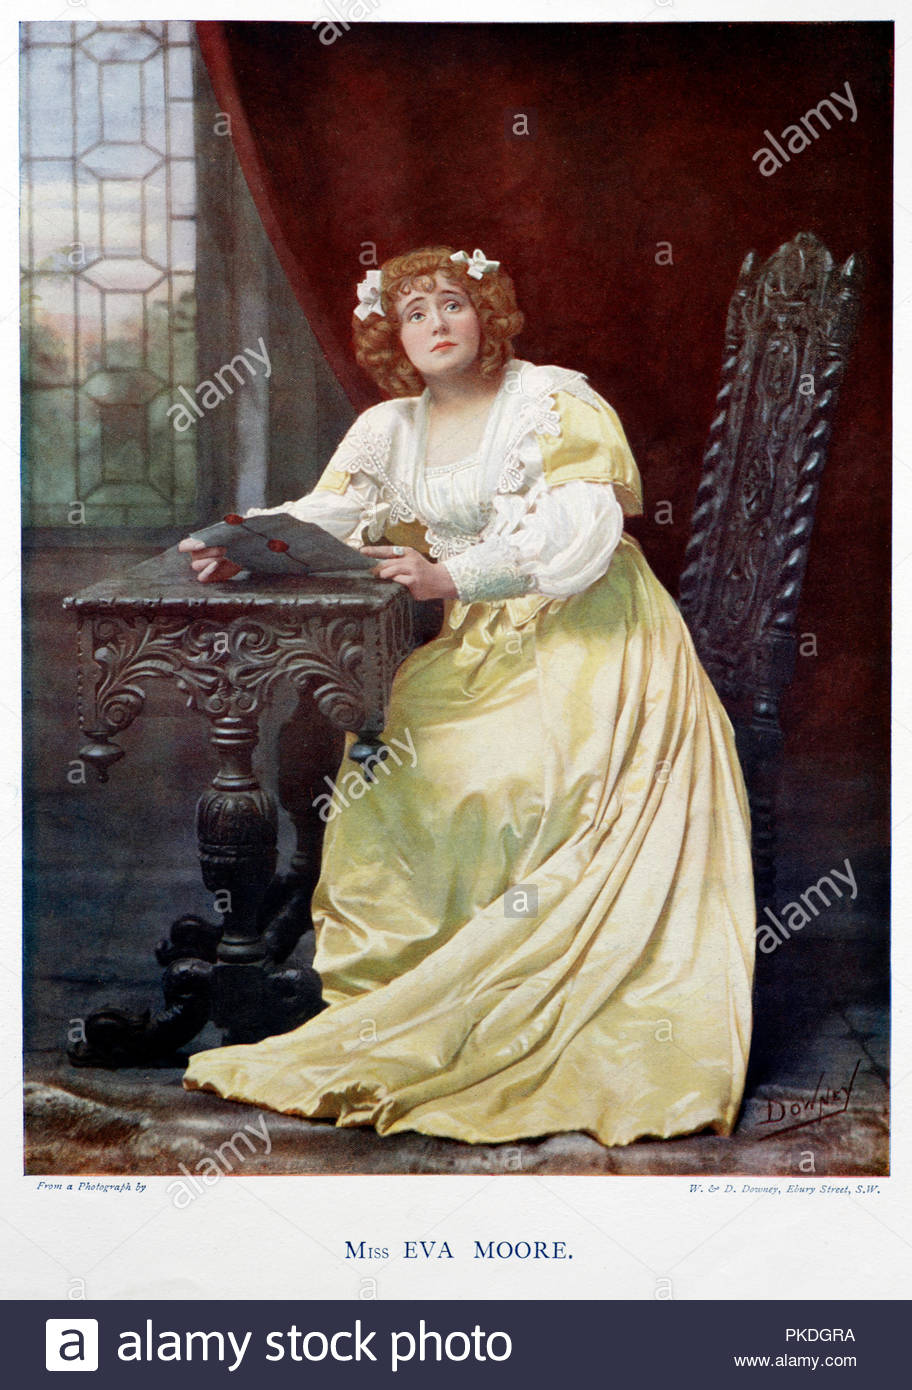 Eva Moore portrait, 1868 – 1955, was an English actress. Her career on stage and in film spanned six decades, and she was active in the women's suffrage movement. Colour illustration from 1899. Stock Photo